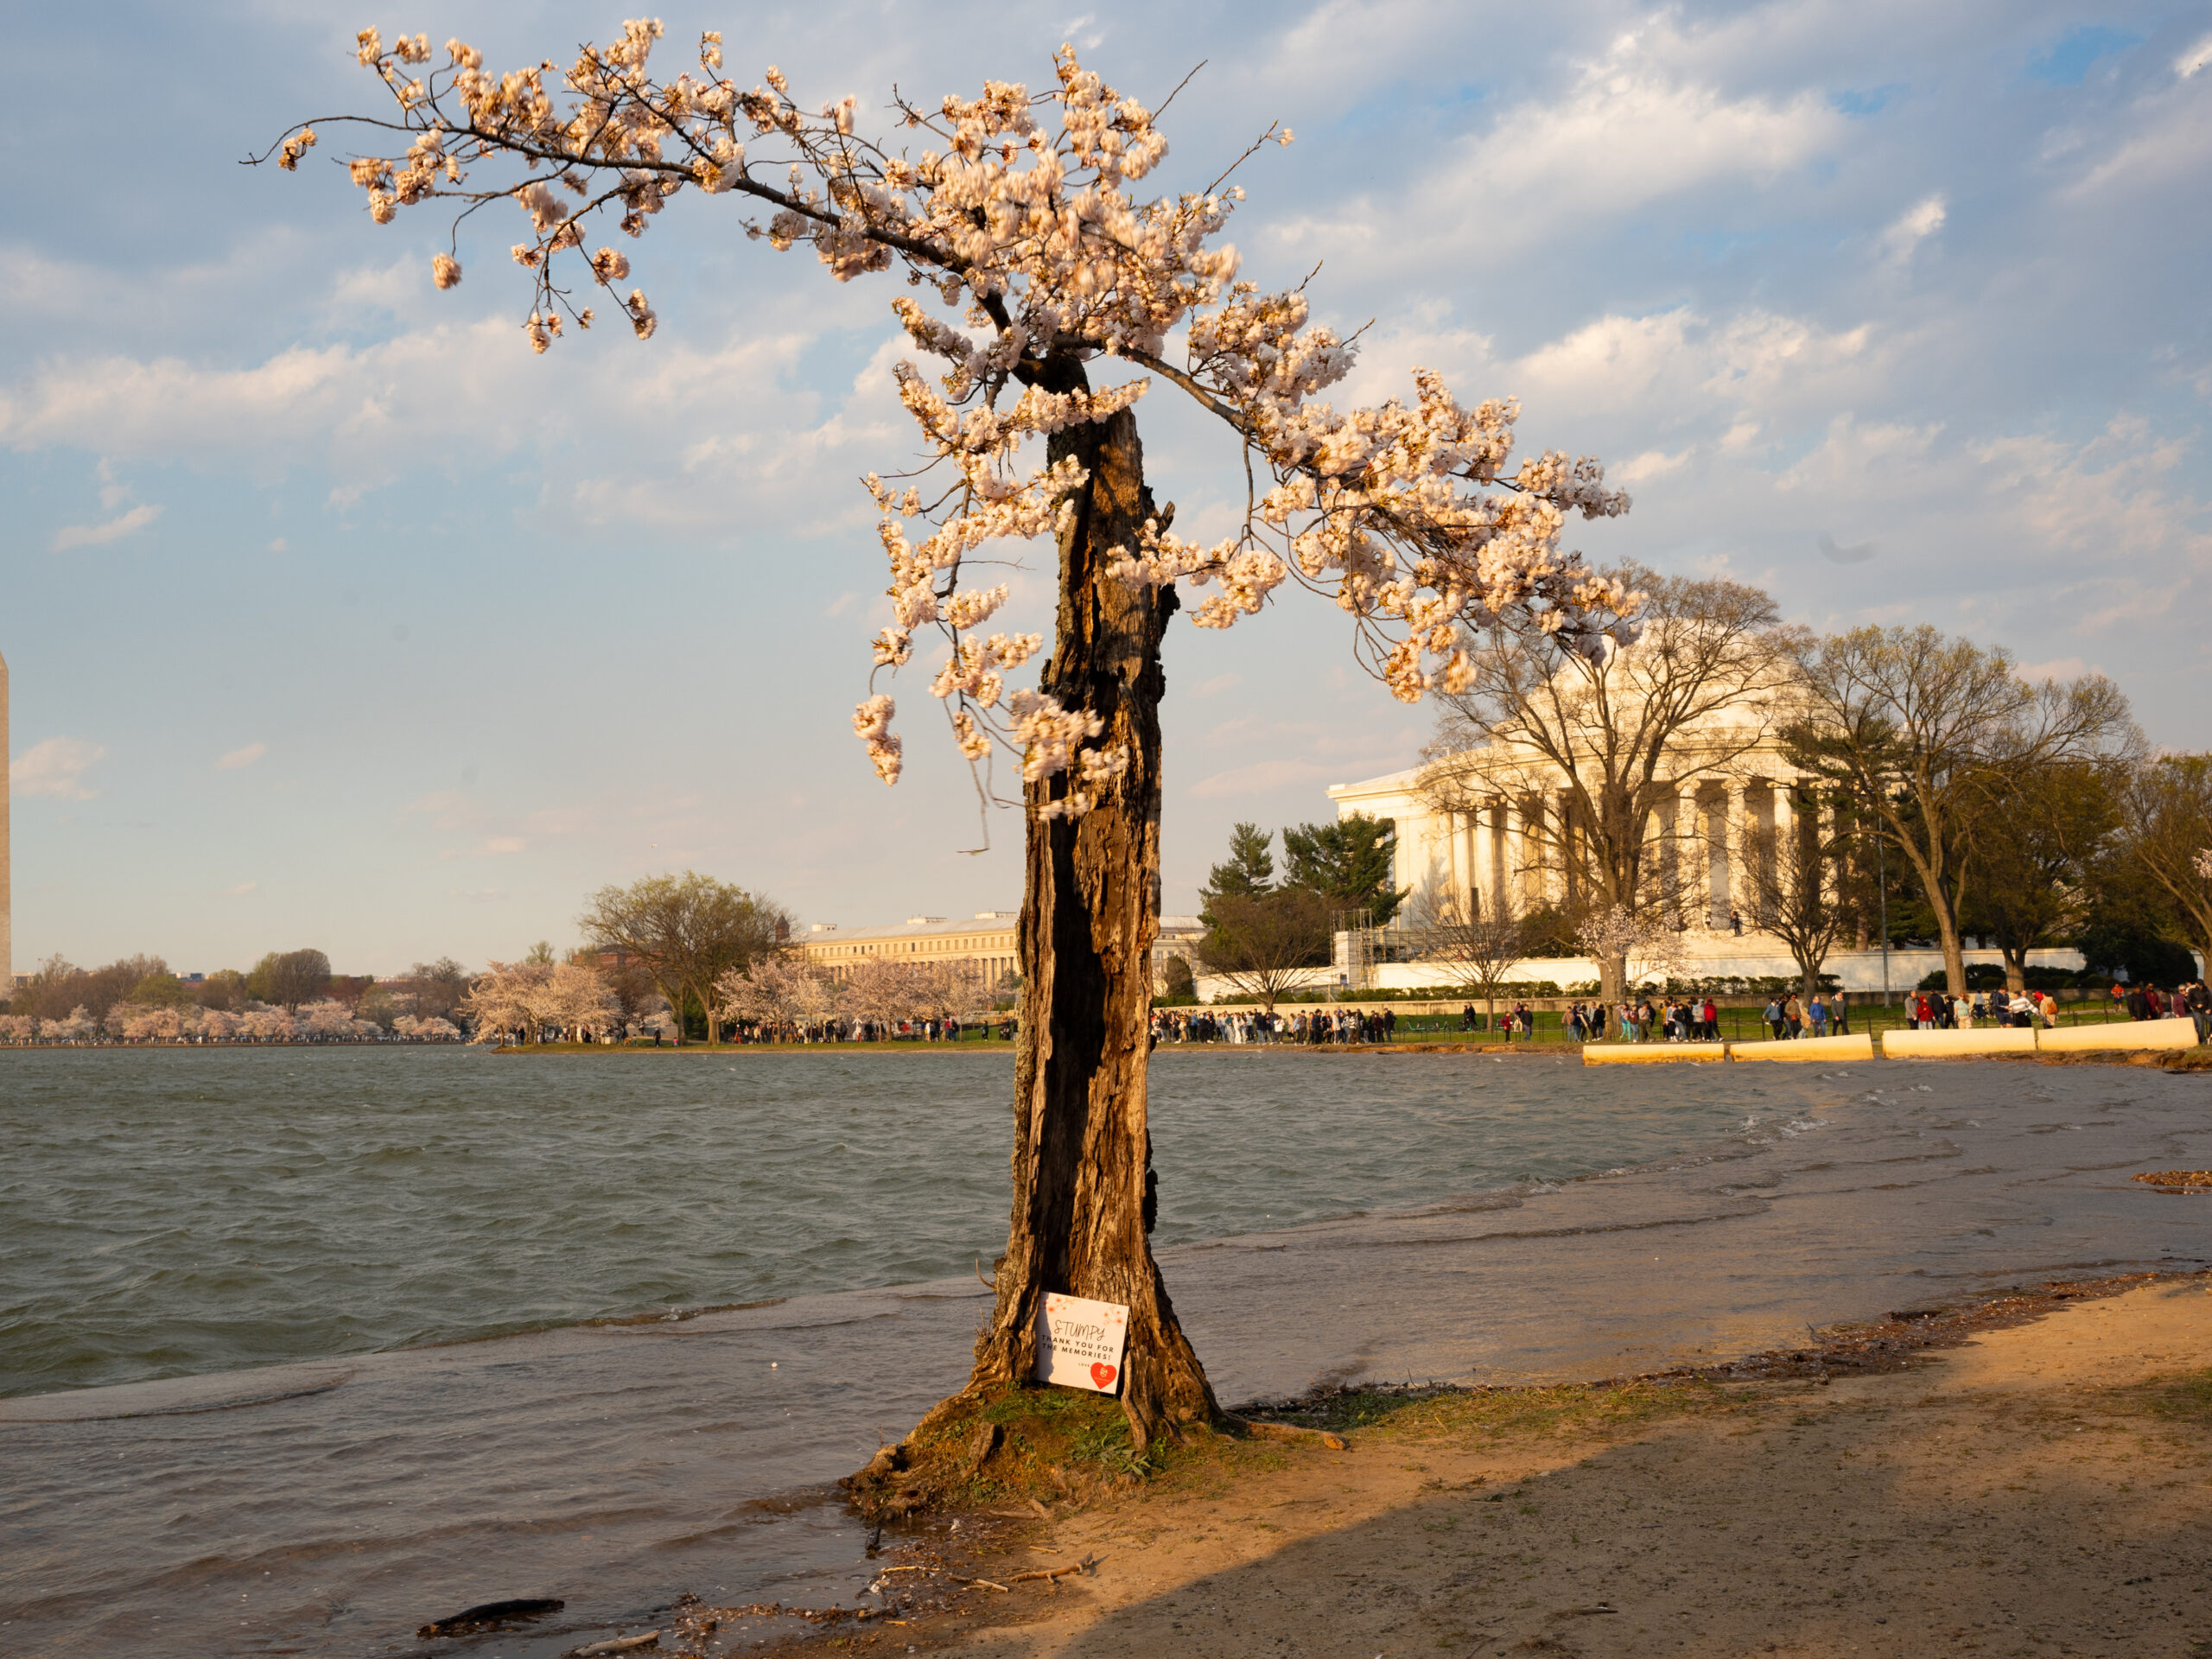 Photos: See D.C.’s cherry blossoms in peak bloom, bid farewell to ‘Stumpy’